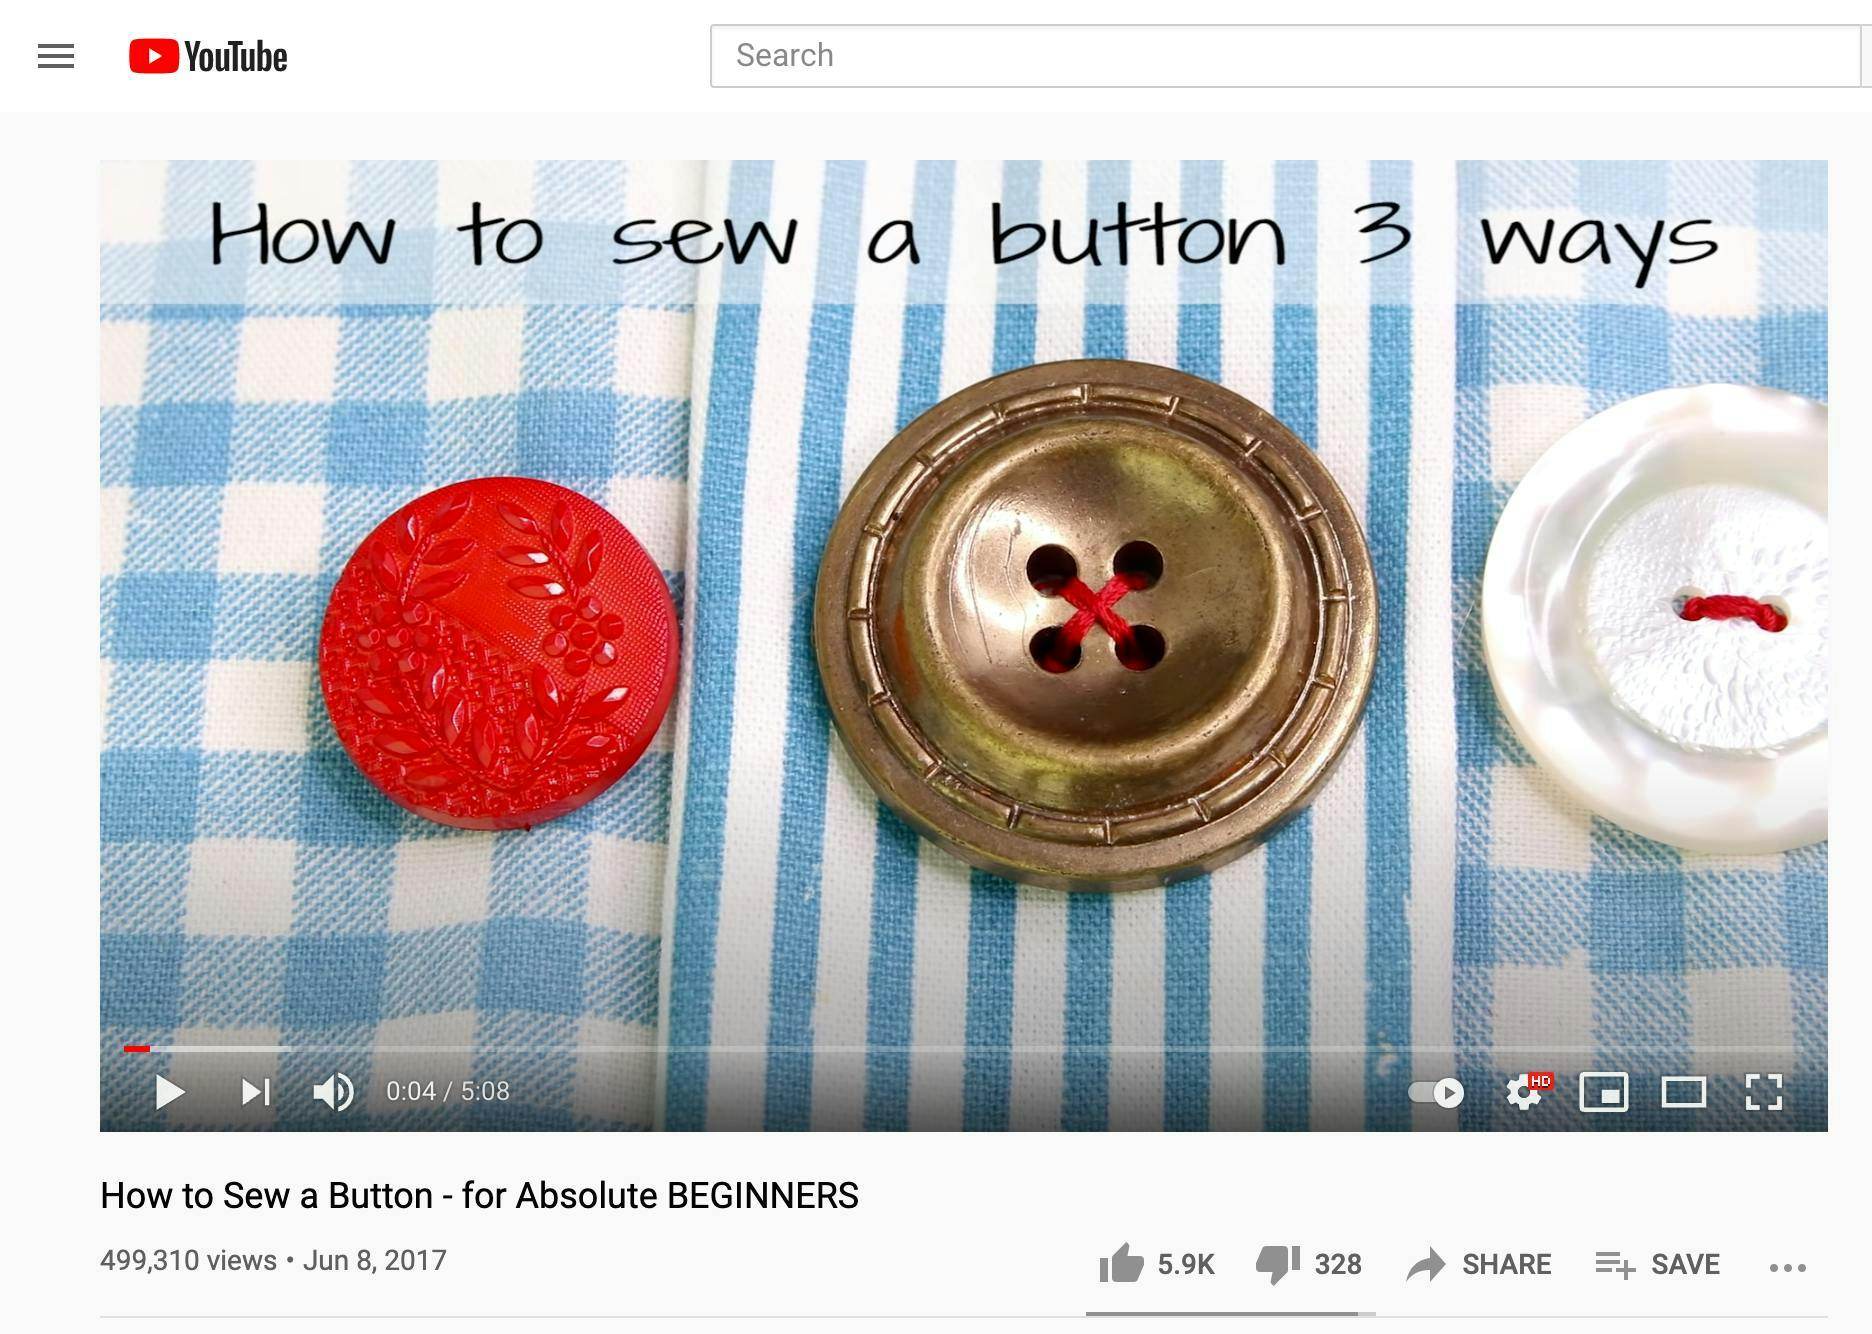 Screenshot of YouTube video about how to sew a button